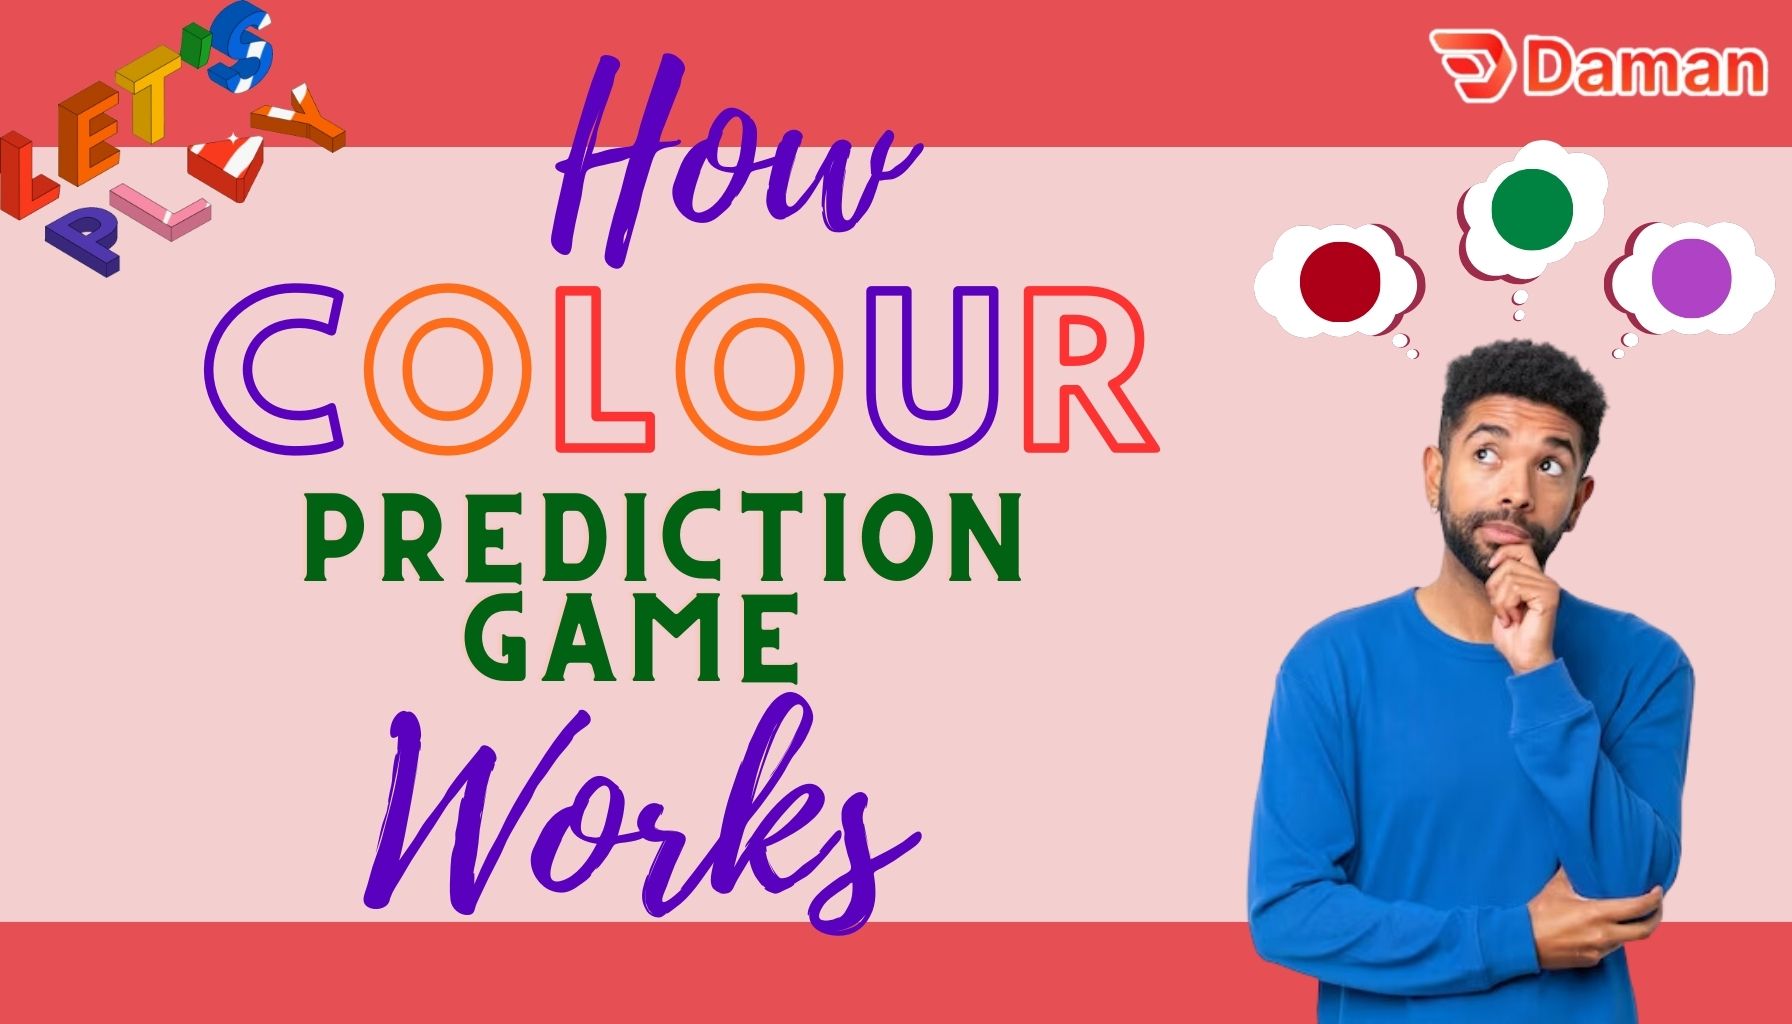 an image of a man thinking on how to play colour prediction game